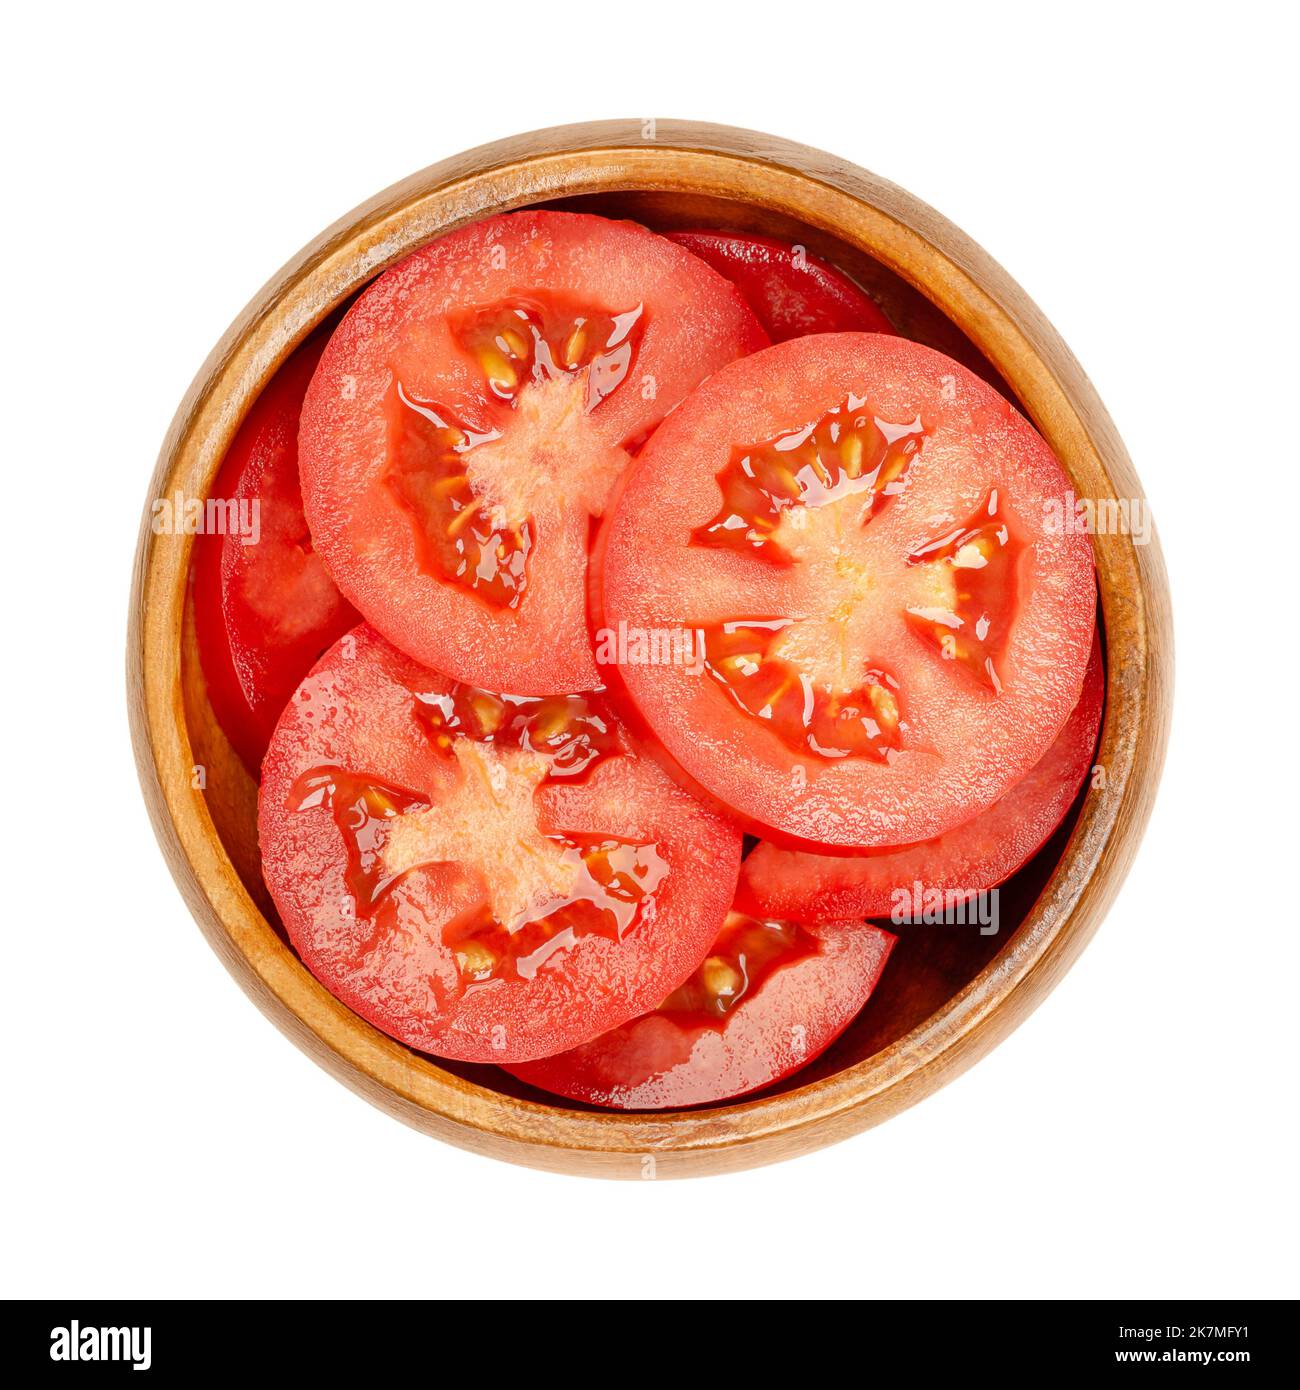 Fresh plum tomato slices, in a wooden bowl, isolated from above. Sliced red ripe oval tomatoes, layered on top of each other. Stock Photo